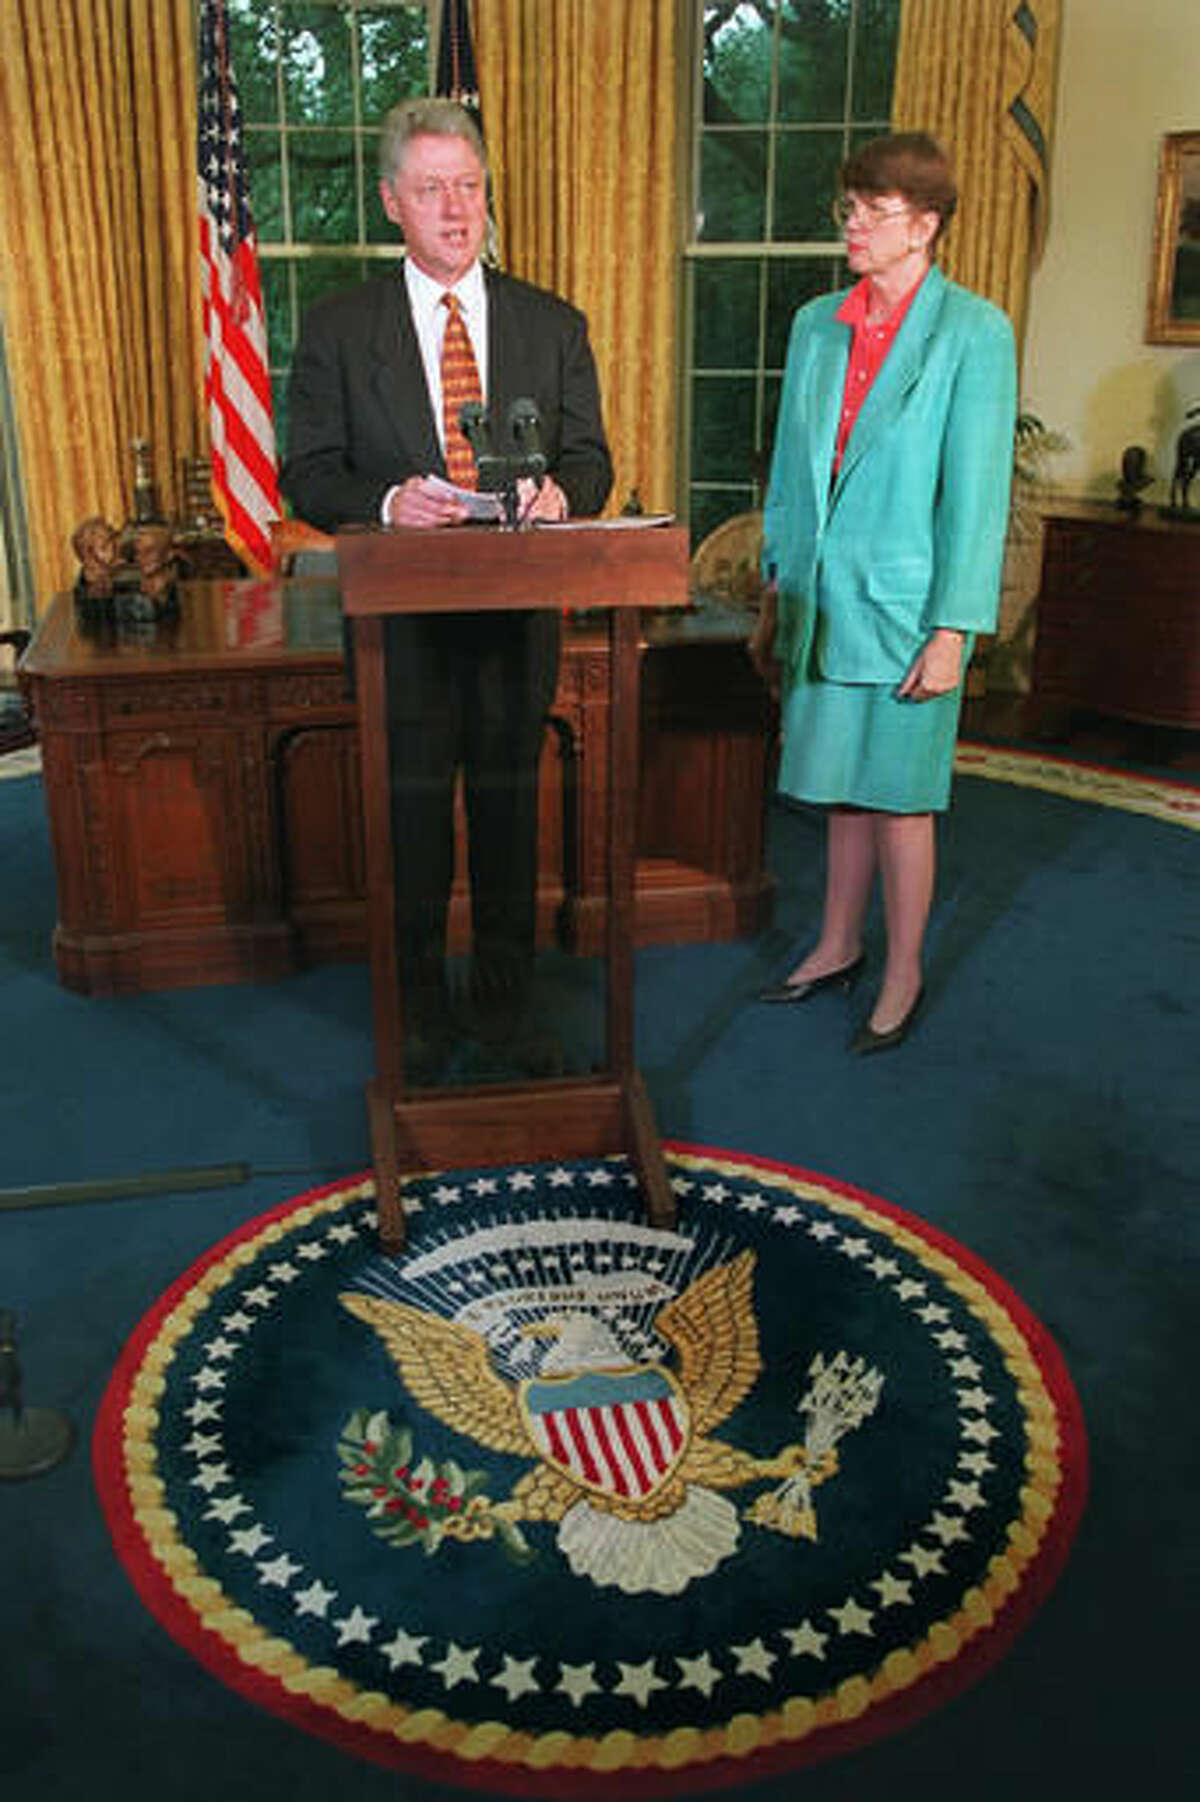 FILE - In this Monday Sept. 16, 1996, file photo, U.S. President Bill Clinton, accompanied by Attorney General Janet Reno, speaks in the Oval Office of the White House after receiving a progress report from the anti-violence initiative. Reno, the first woman to serve as U.S. attorney general and the epicenter of several political storms during the Clinton administration, has died early Monday, Nov. 7, 2016. She was 78. (AP Photo/Ron Edmonds, File)